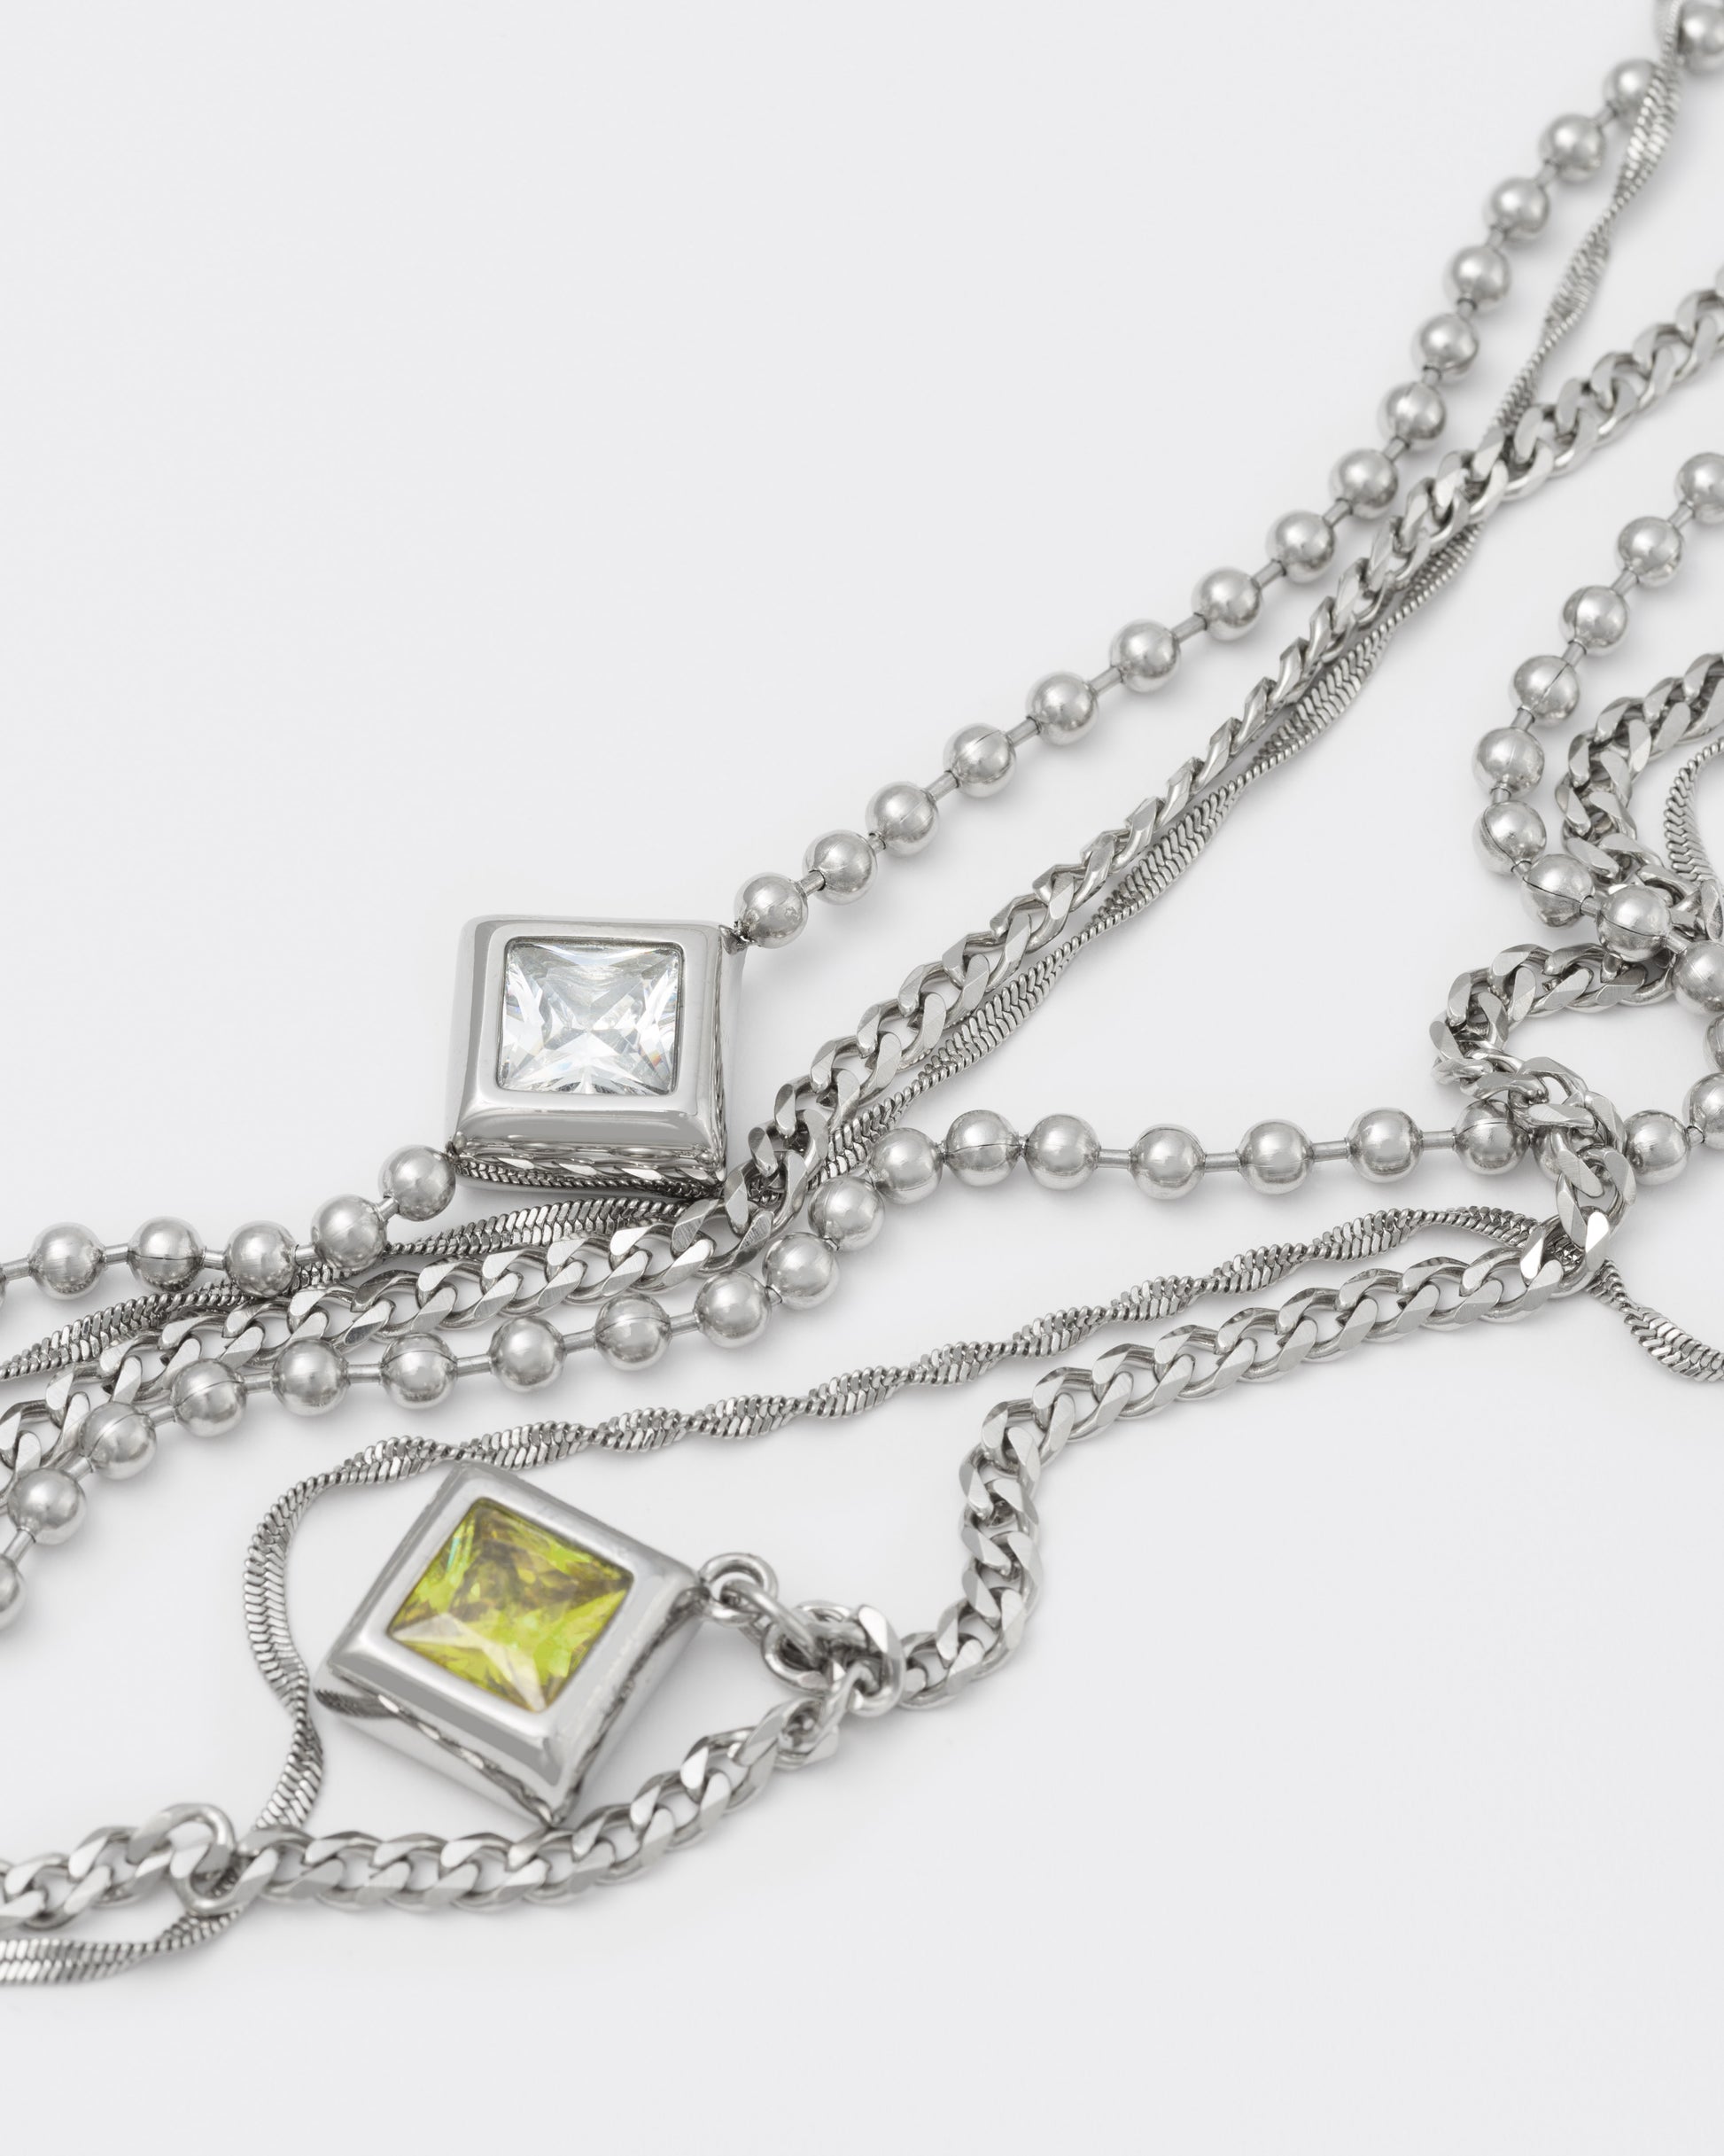 detail of triple layer chain necklace with 18kt white gold coating and rhombus shaped pendants with princess-cut stones in diamond white, sapphire blue, olive and dark champagne